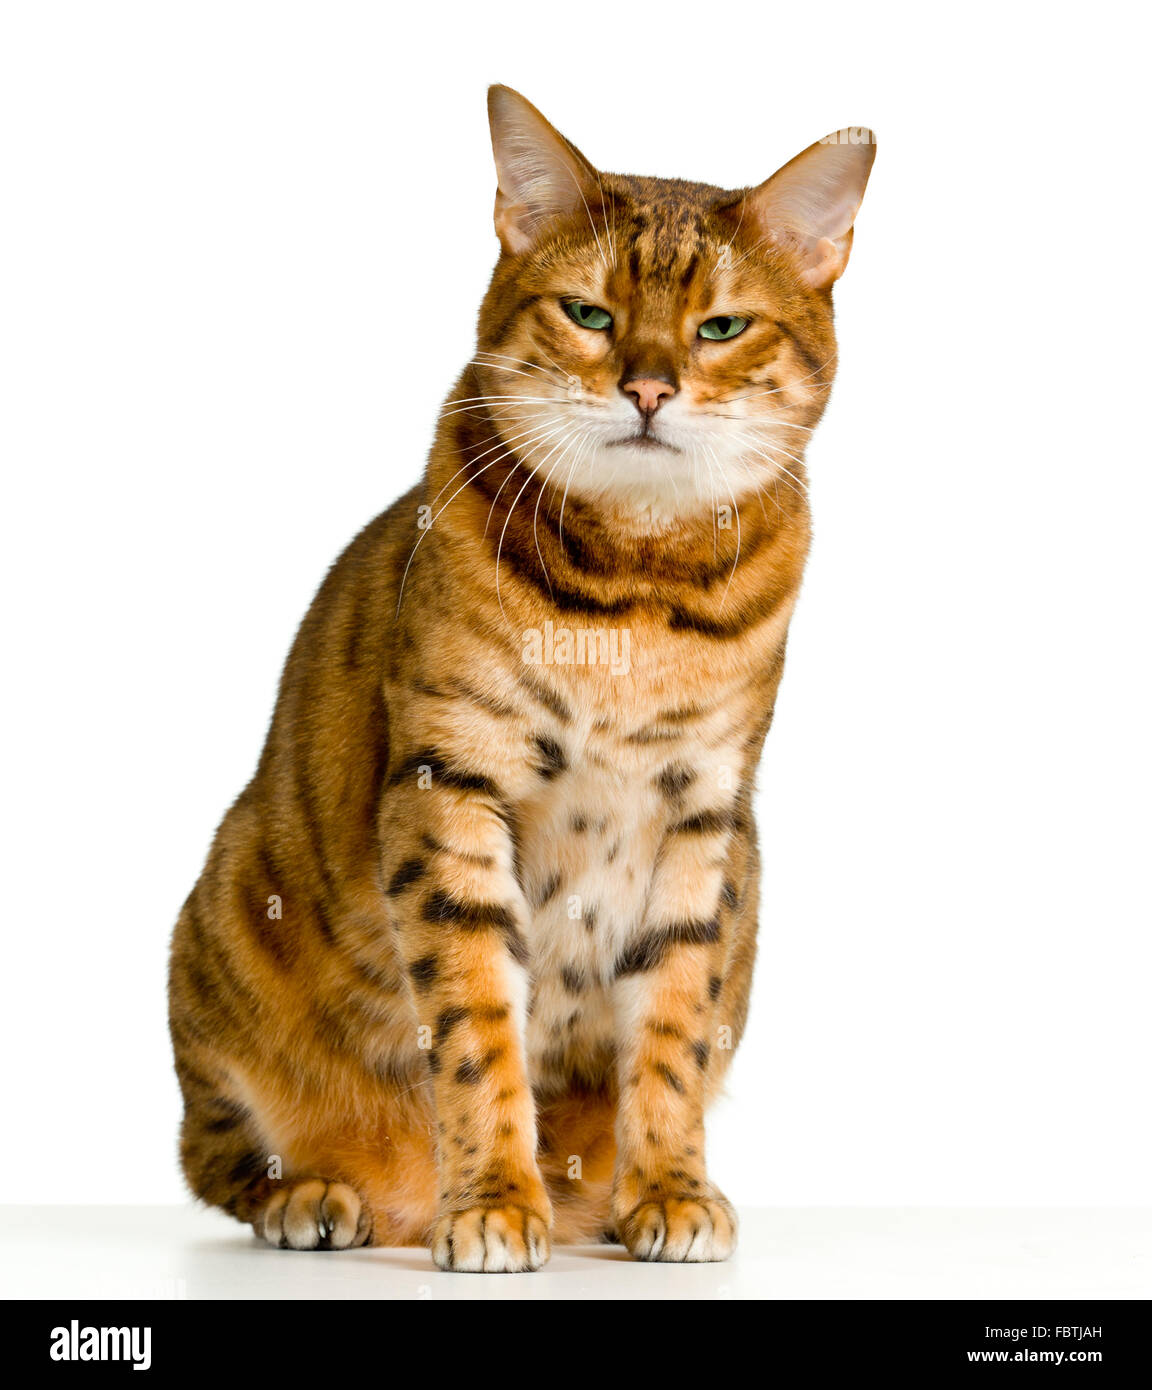 Cute Bengal kitten looks angry as it stares at the viewer Stock Photo